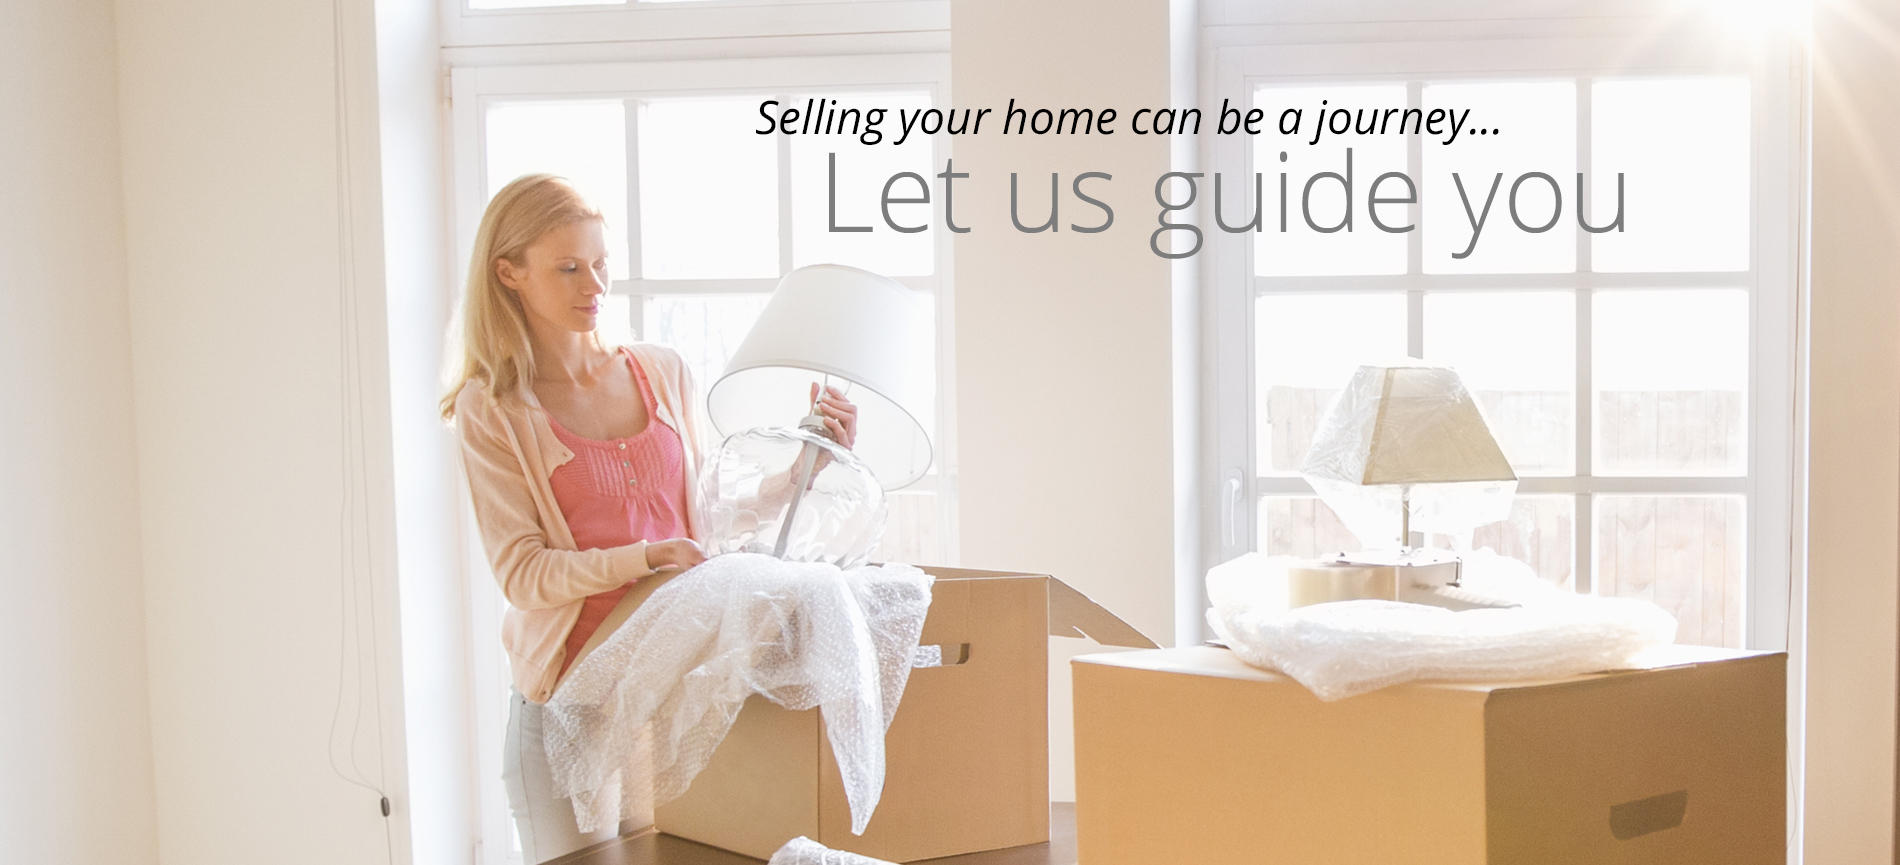 Selling your home can be a journey, let us guide you.